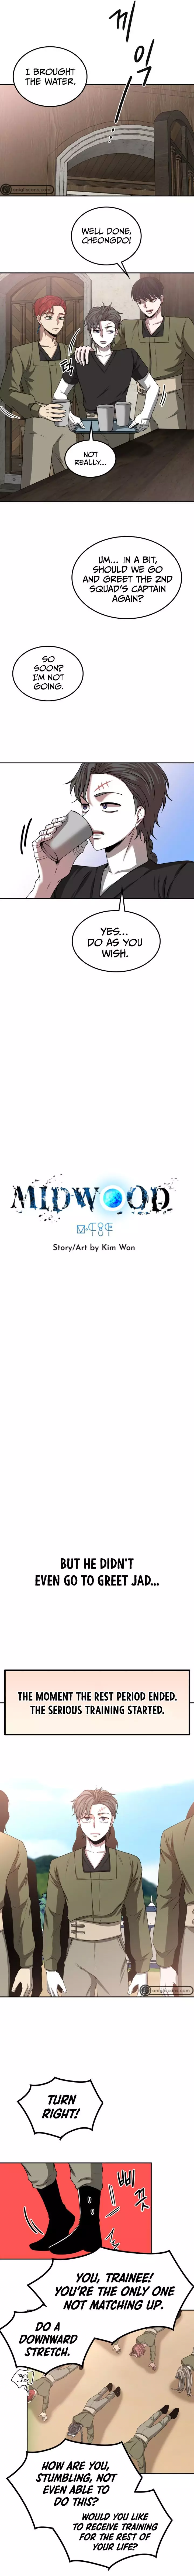 Midwood - 8 page 3-13cd2452